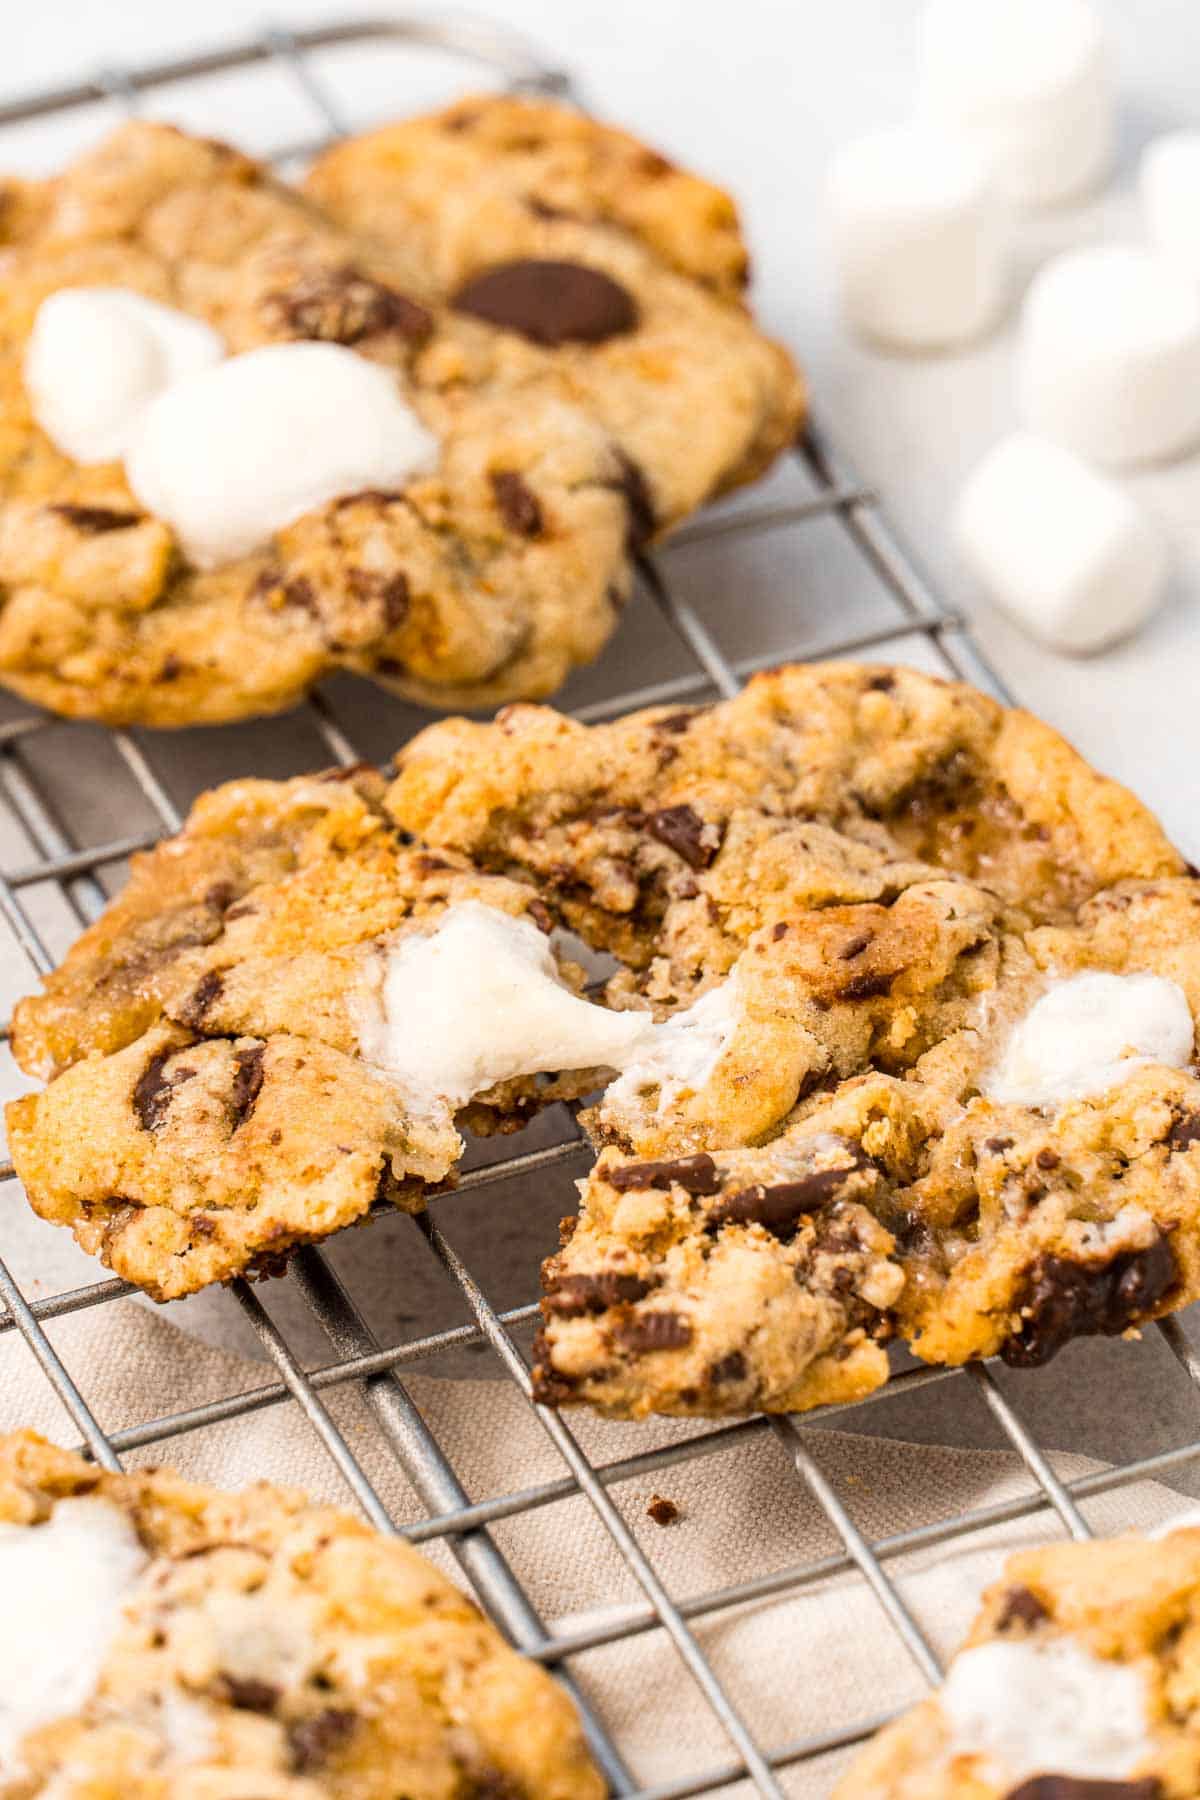 A close-up of s’mores cookies on a wire rack.